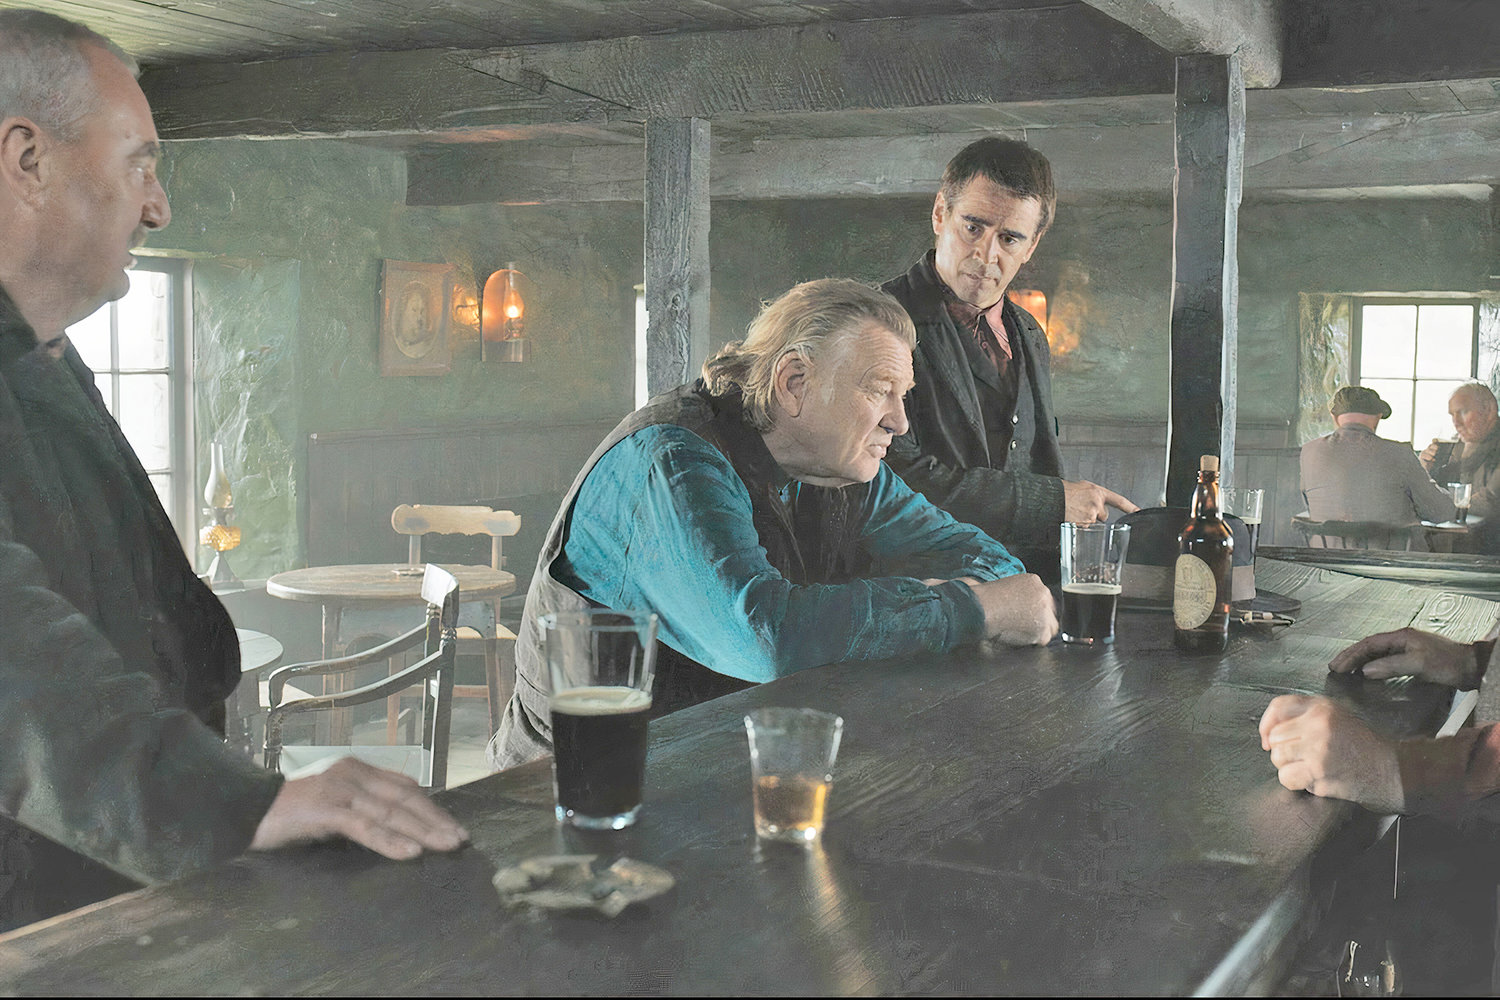 Brendan Gleeson, center, and Colin Farrell in a scene from “The Banshees of Inisherin.”